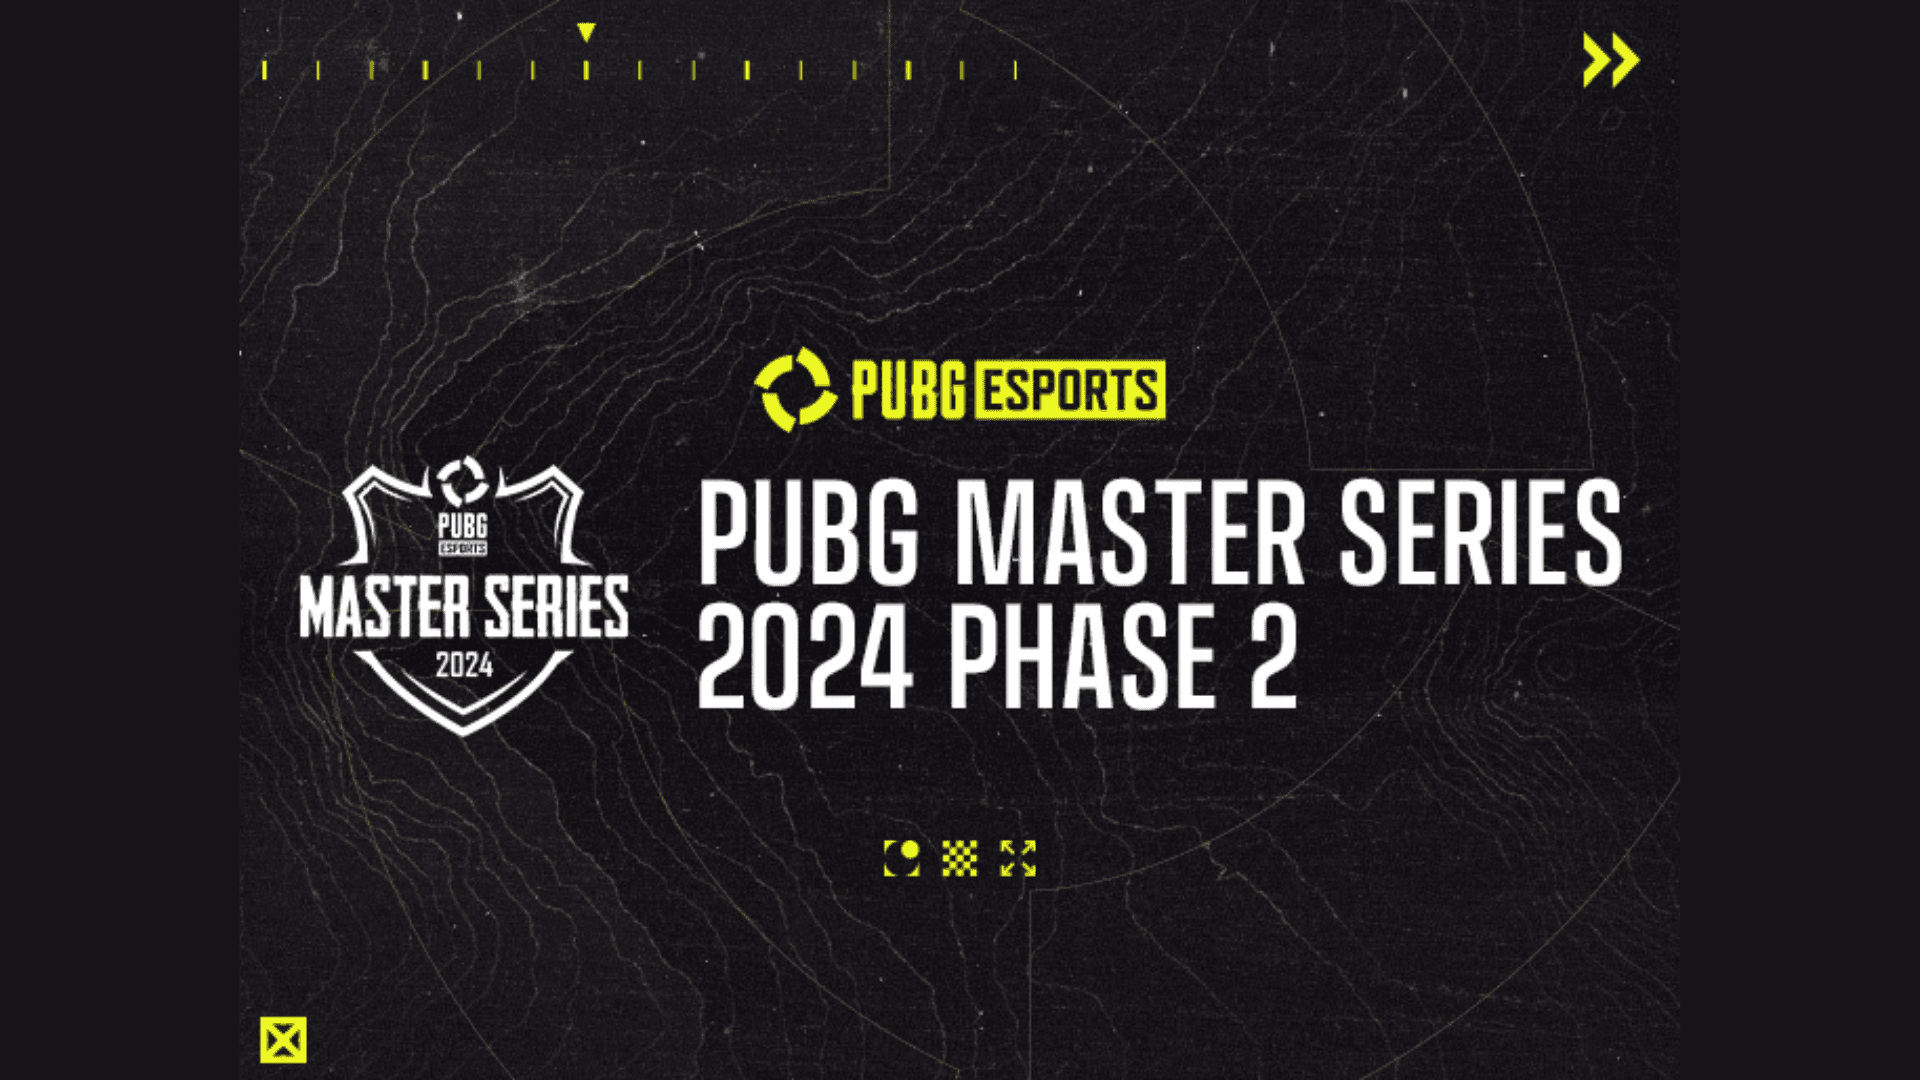 PUBG MASTER SERIES 2024 PHASE 2 feature image